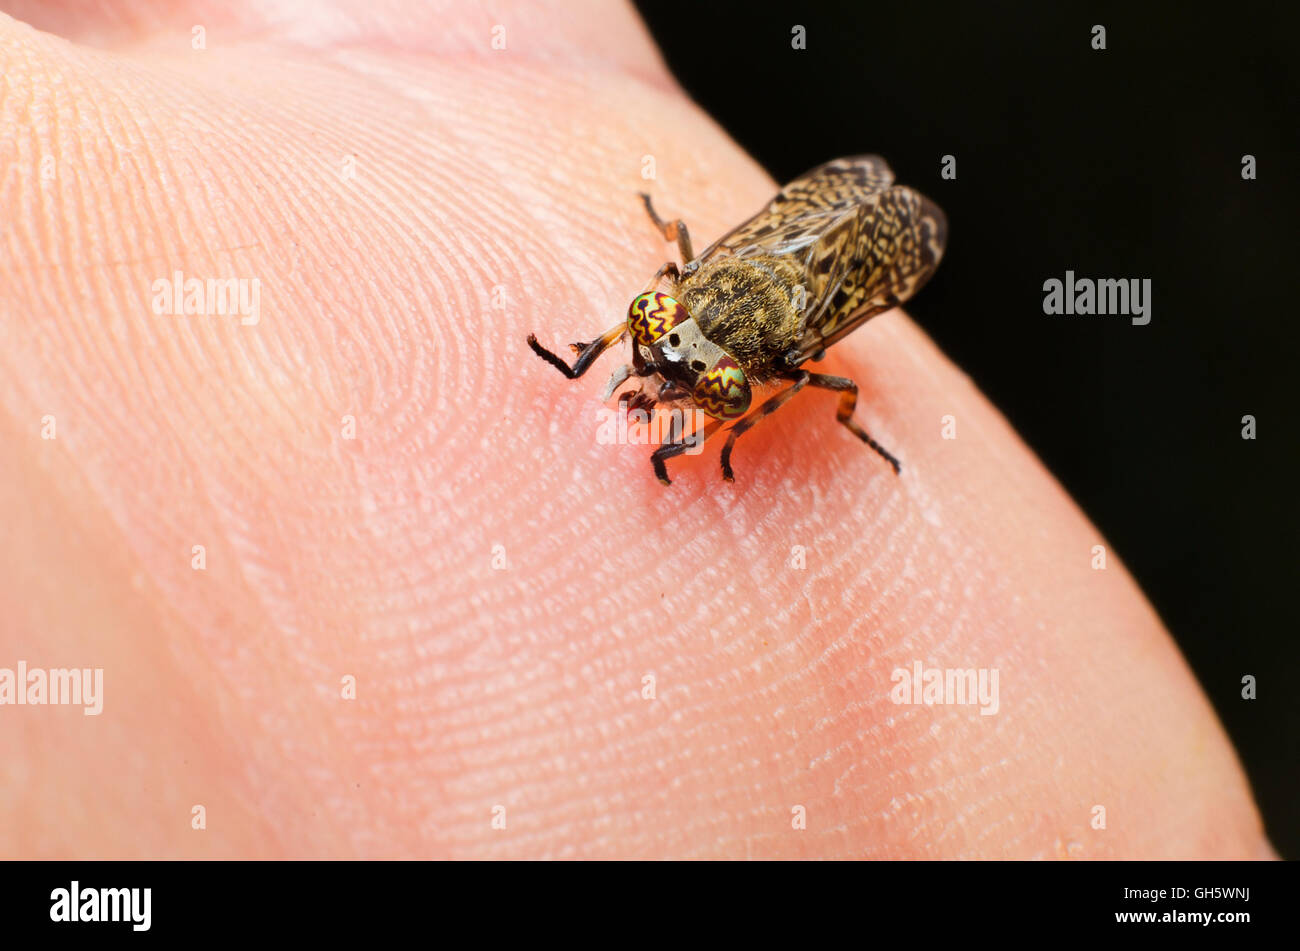 A common horse fly,Grey fly or 'Notch-horned Cleg Fly', biting a human Stock Photo